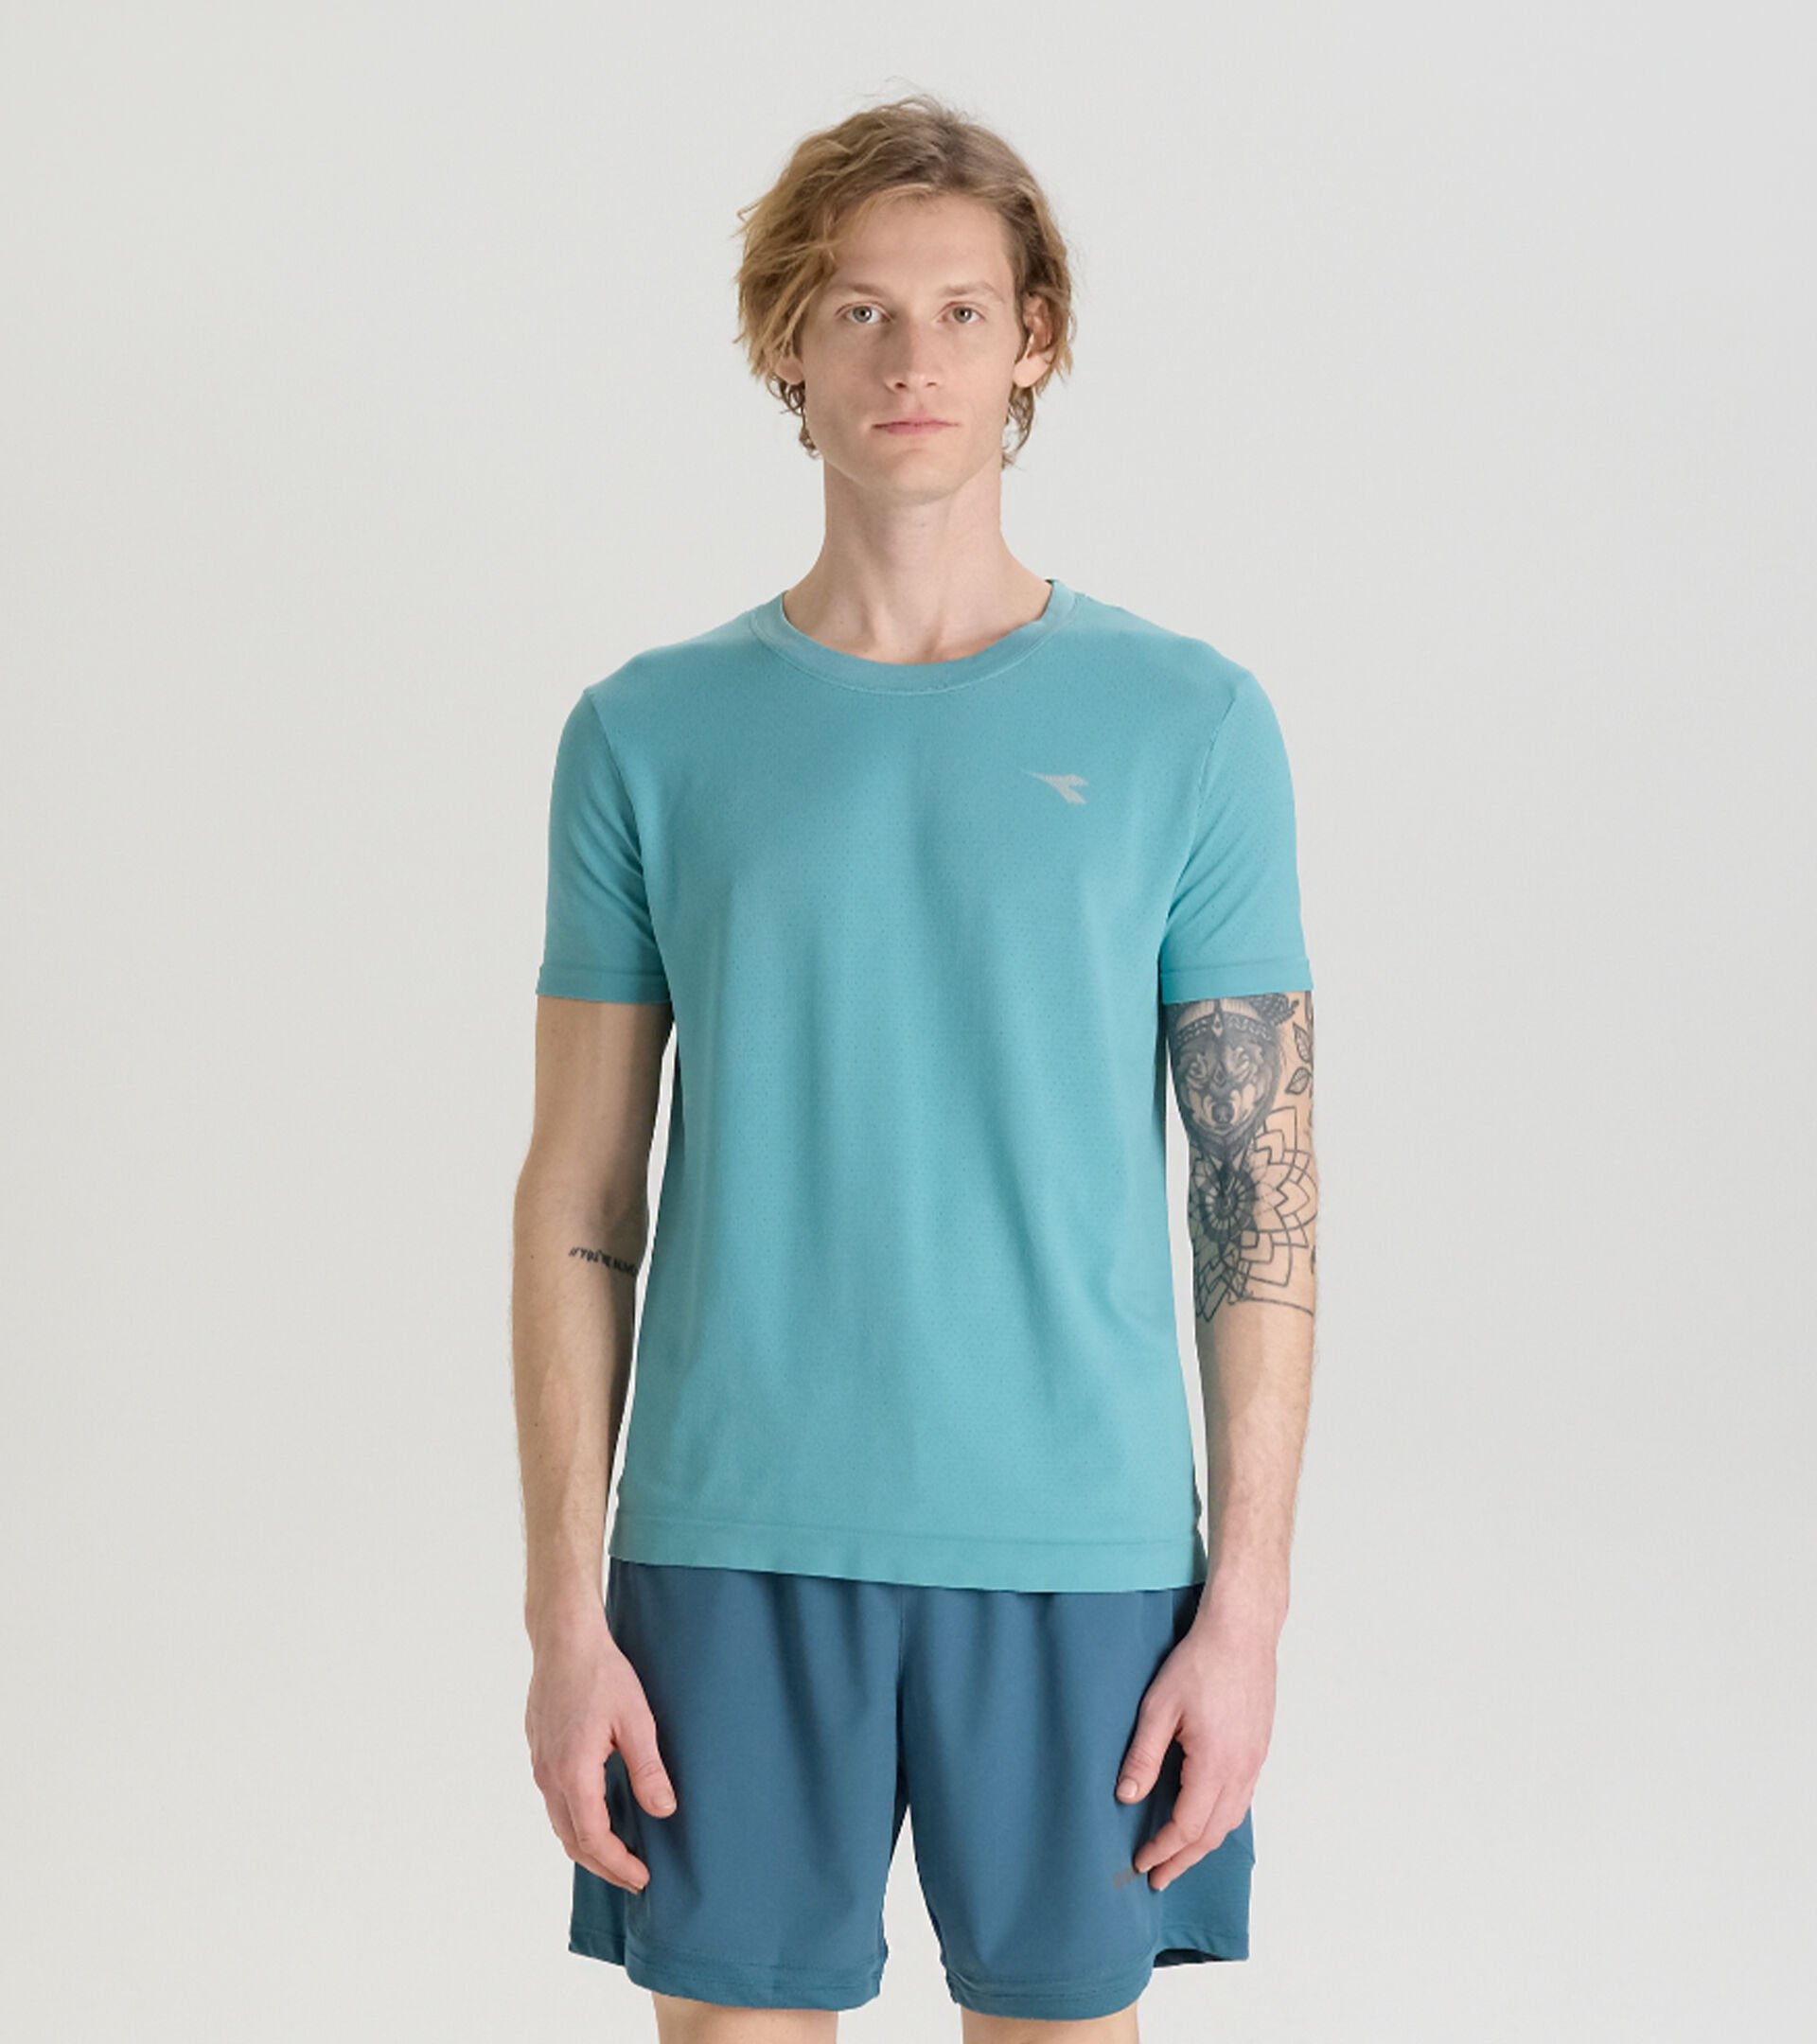 Camiseta de running sin costuras - Made in Italy - Hombre SS T-SHIRT SKIN FRIENDLY DUSTY TURQUOISE - Diadora